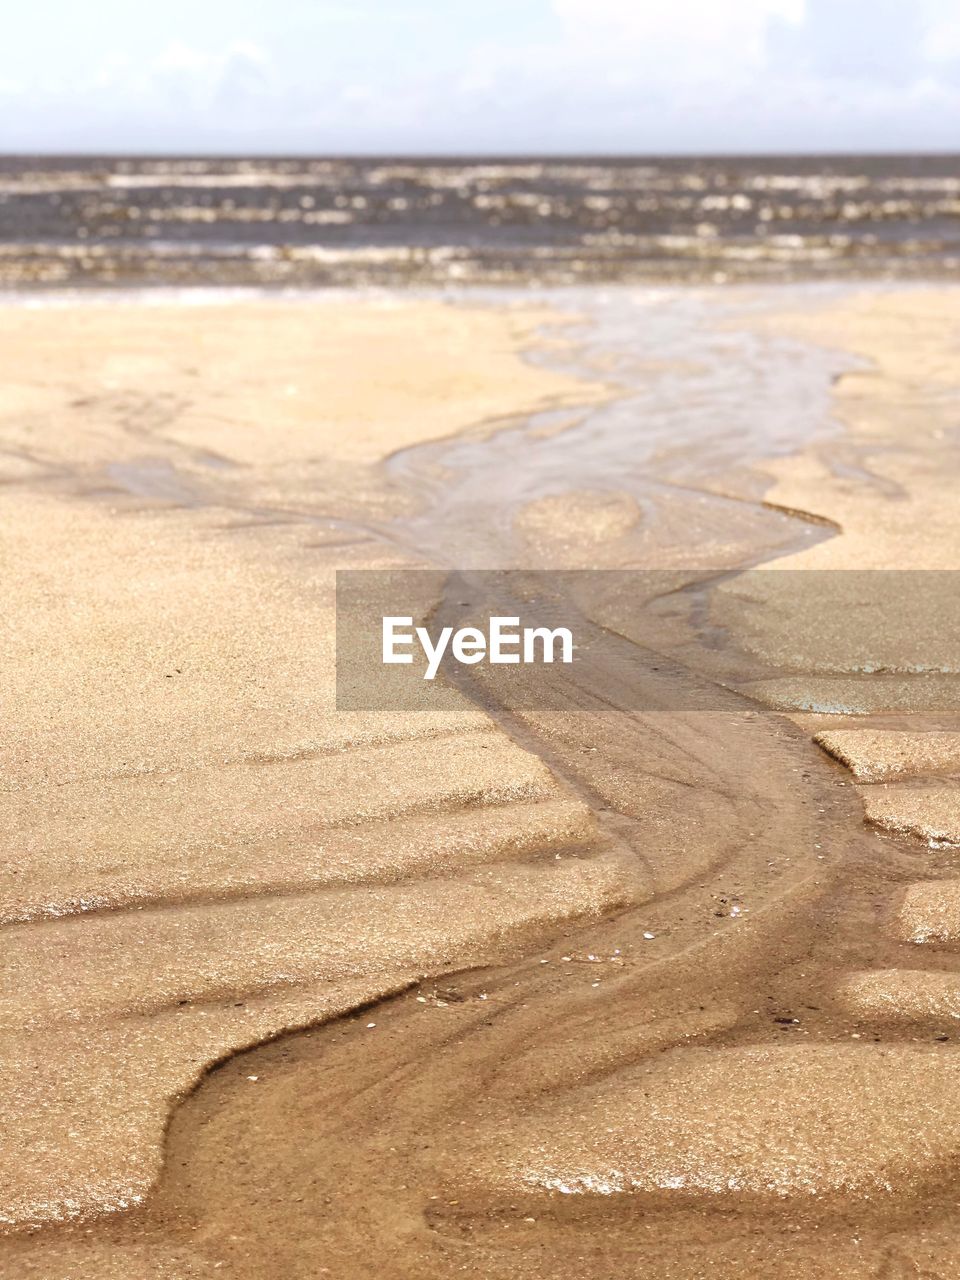 HIGH ANGLE VIEW OF WET SHORE AT BEACH